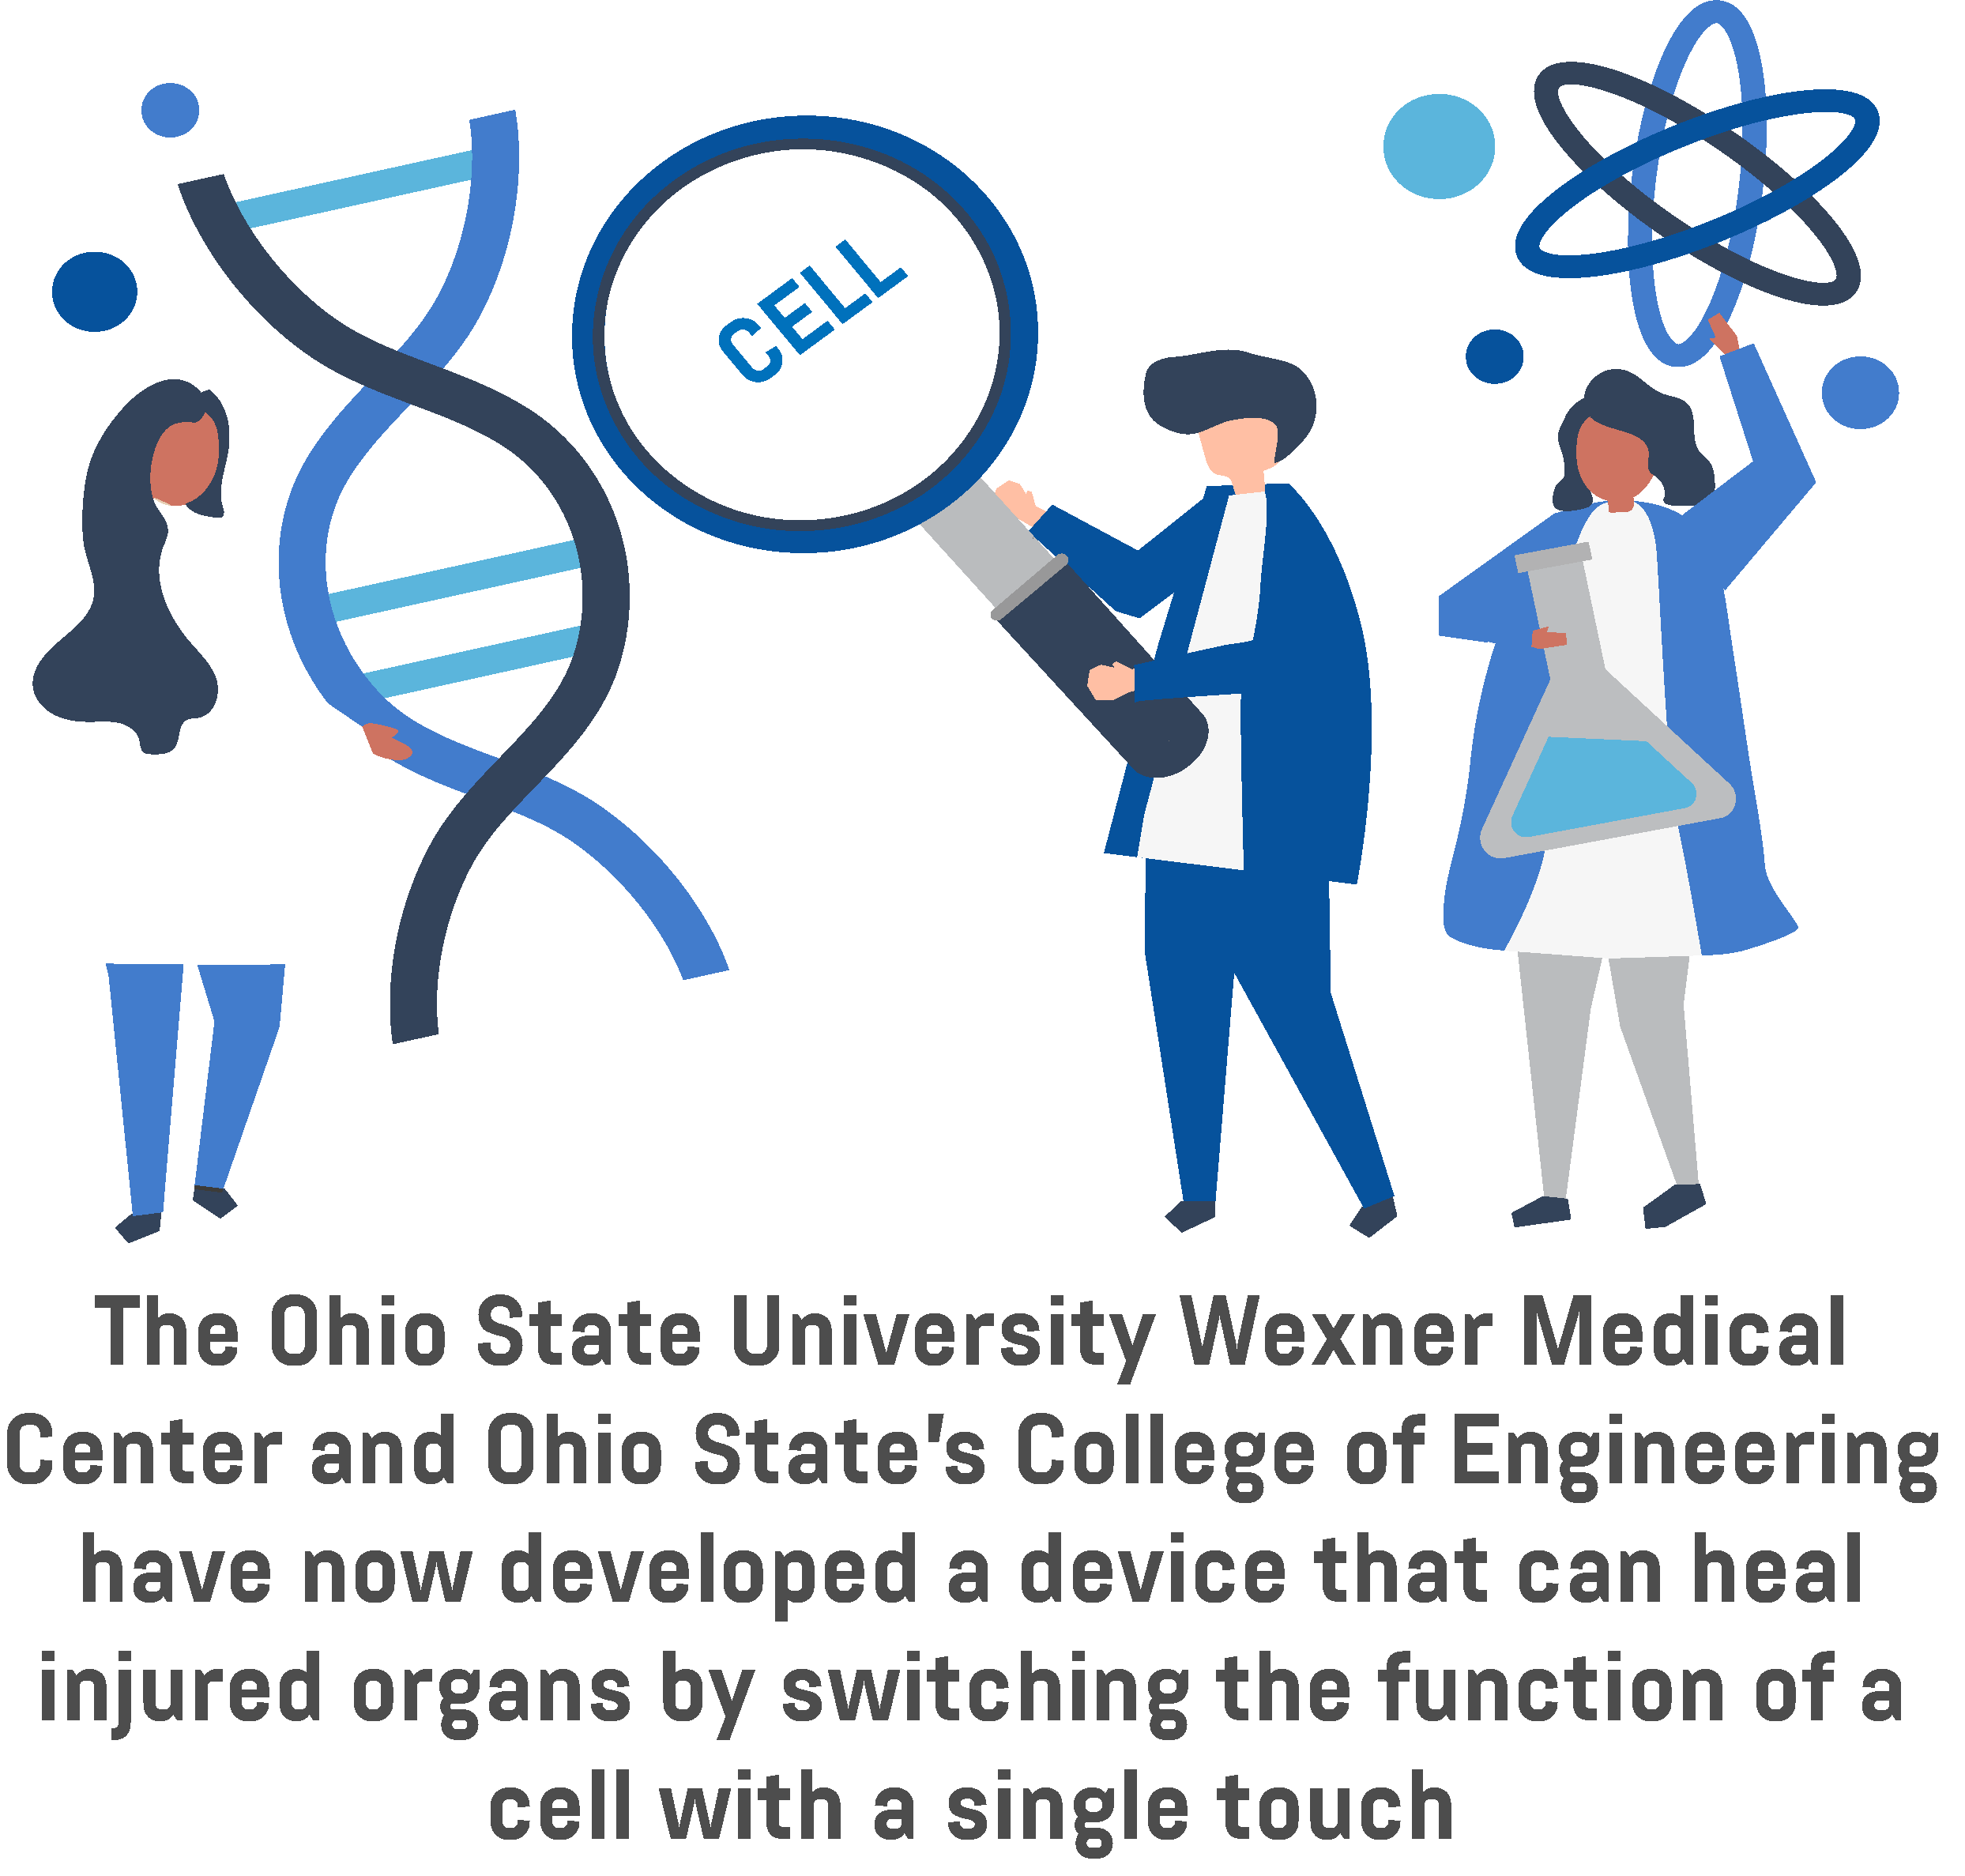  An infographic describing the latest breakthrough in healthcare made by the Ohio State University Wexner Medical Center and Ohio State’s College of Engineering.